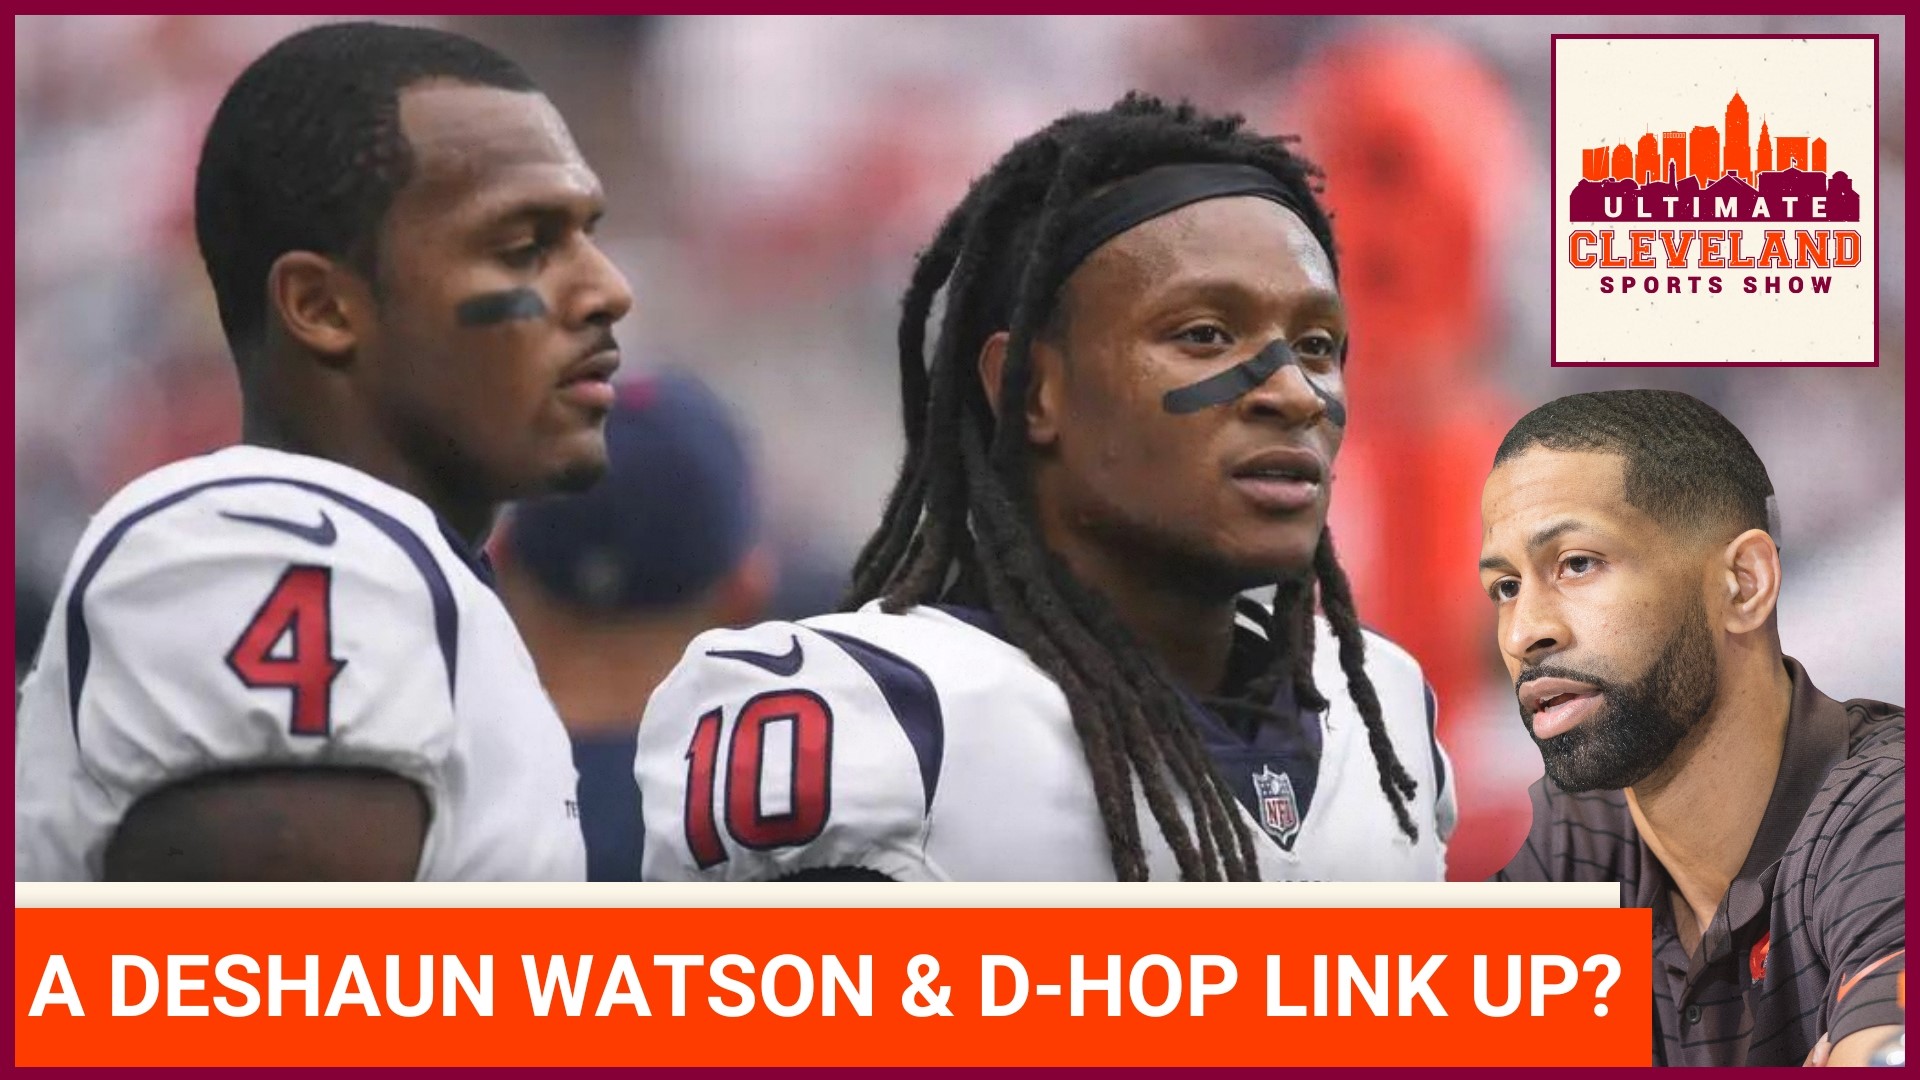 Deshaun Watson and Deandre Hopkins will link up this weekend according to the Browns star QB.